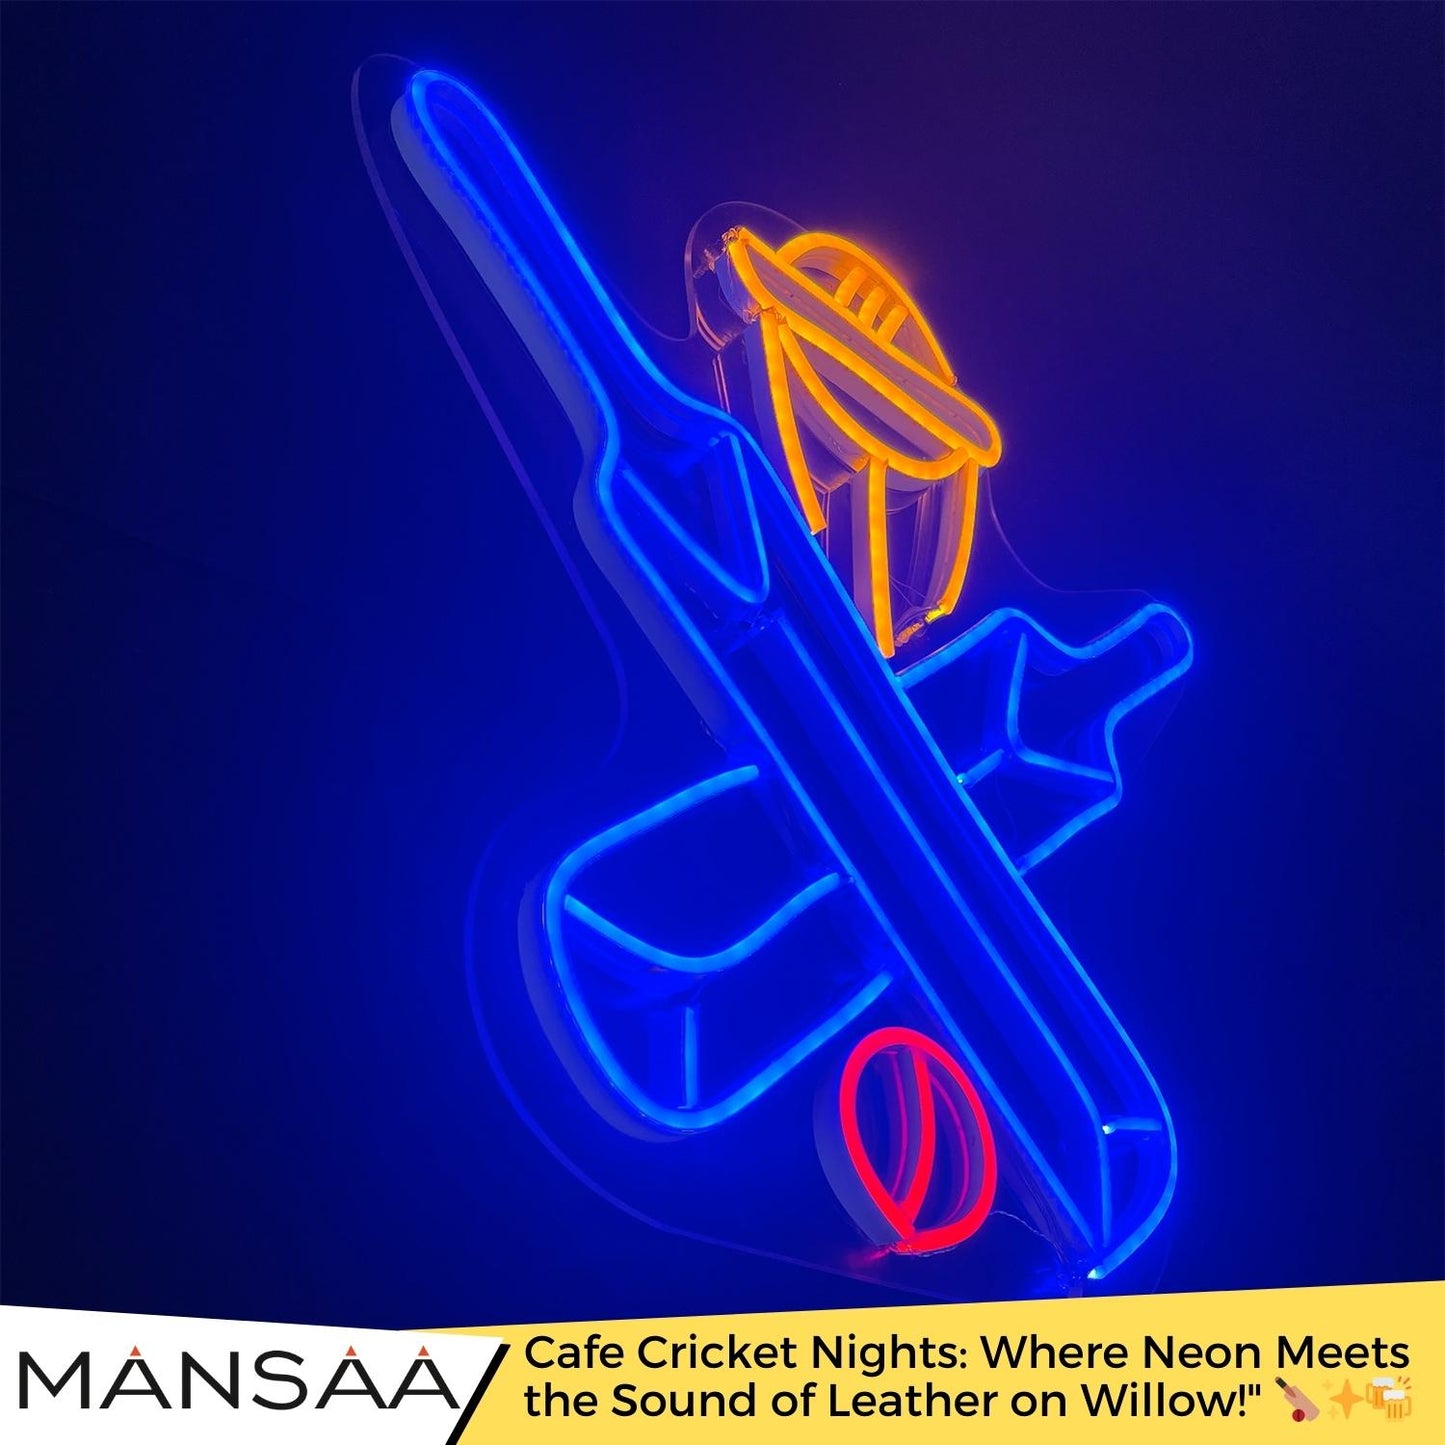 Double Bat Elegance with Cricket World Cup NEON Art | Vibrant Glow | 12x24 Inches | Stylish Cricket Decor